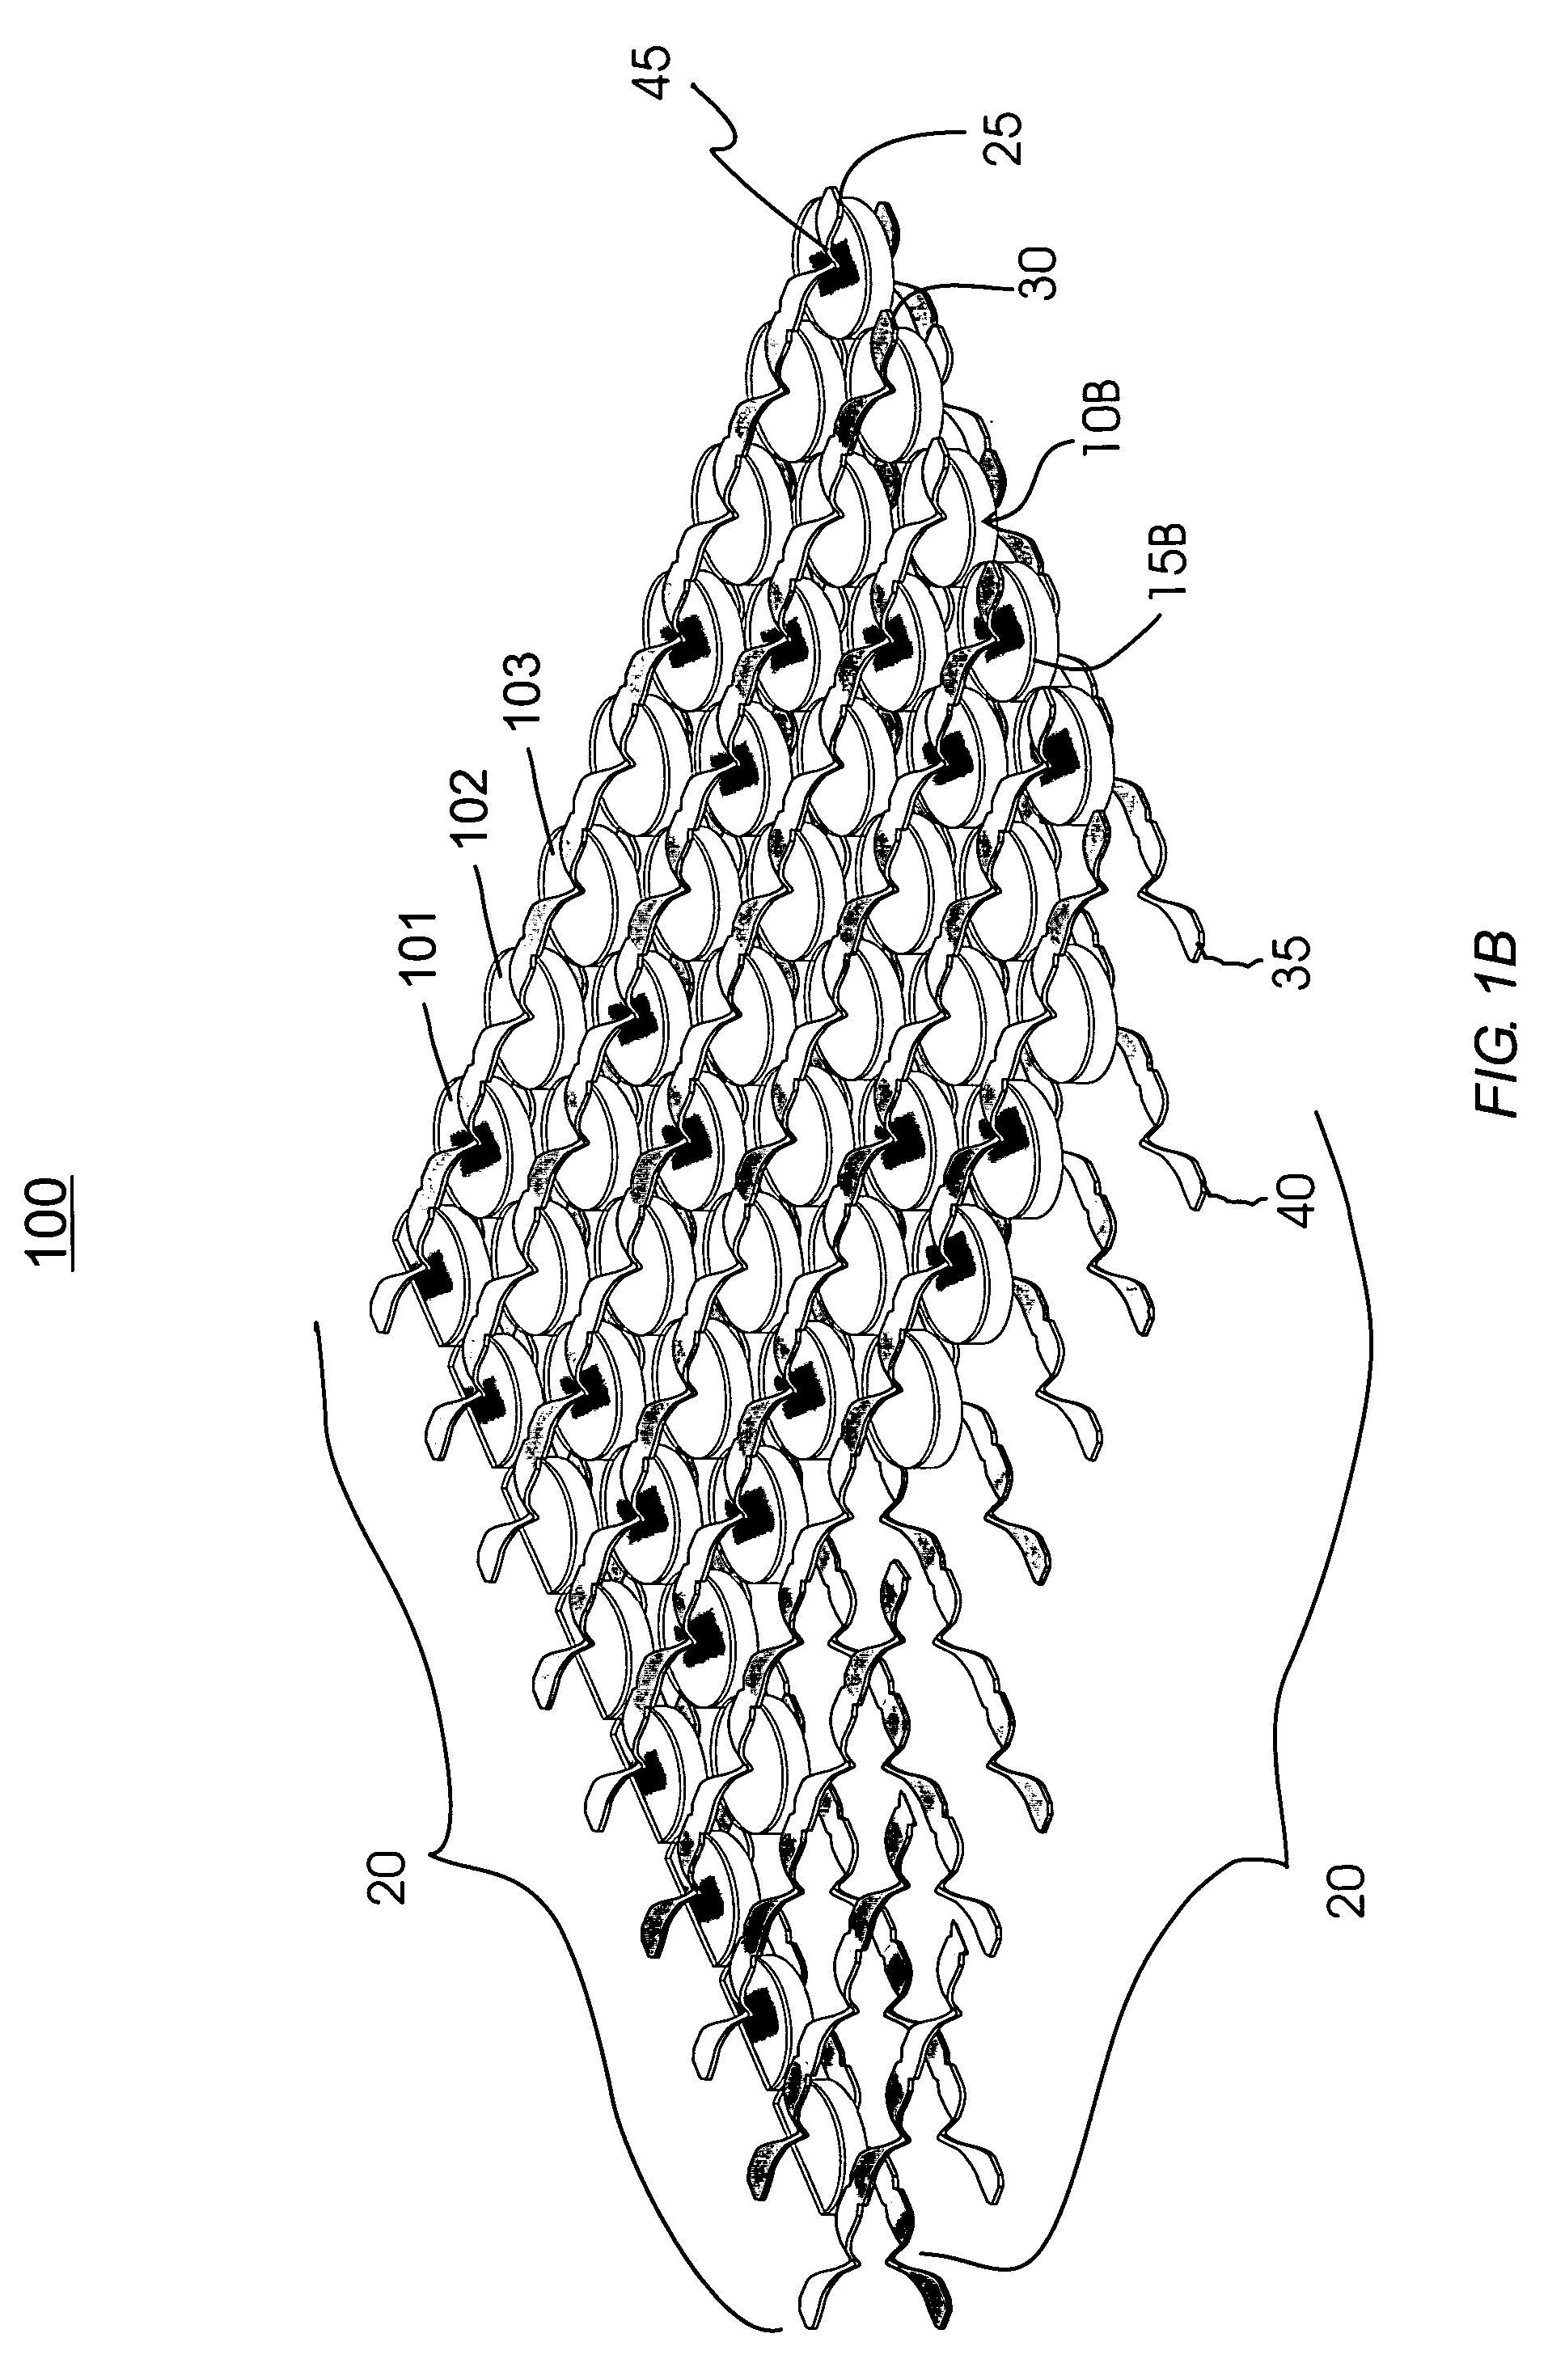 System and method for storing data in an unpatterned, continuous magnetic layer